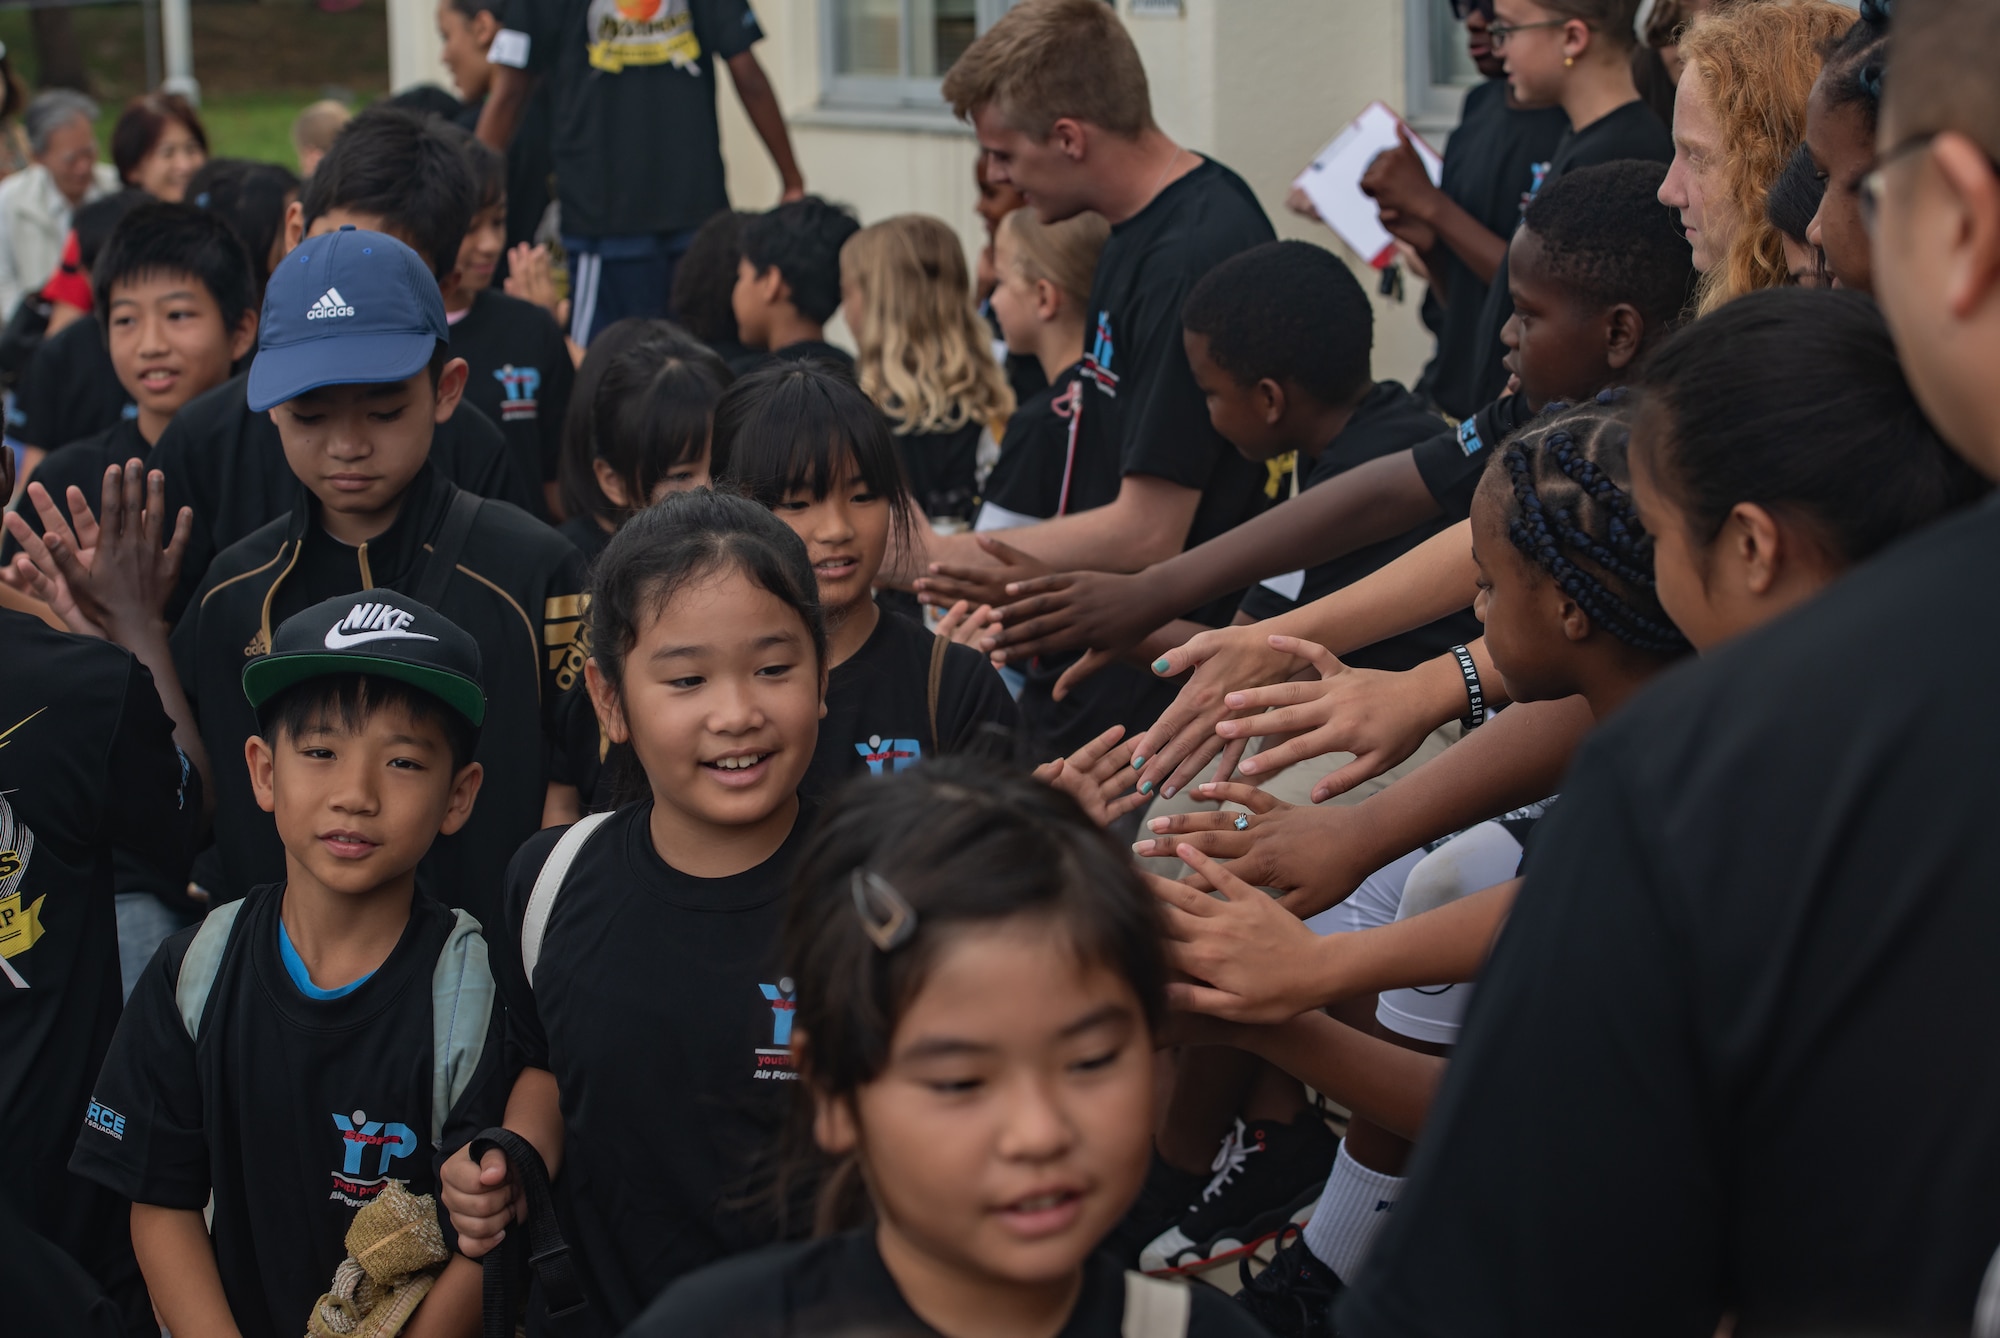 Children from the Kadena Youth Center welcome Okinawan children for Cultural Exchange Day, Sept. 28, 2019, at Kadena Air Base, Japan. The event enabled 49 children from Okinawa and the military community to play and interact with each other through a variety of American and Japanese games and challenges. (U.S. Air Force photo by Staff Sgt. Micaiah Anthony)